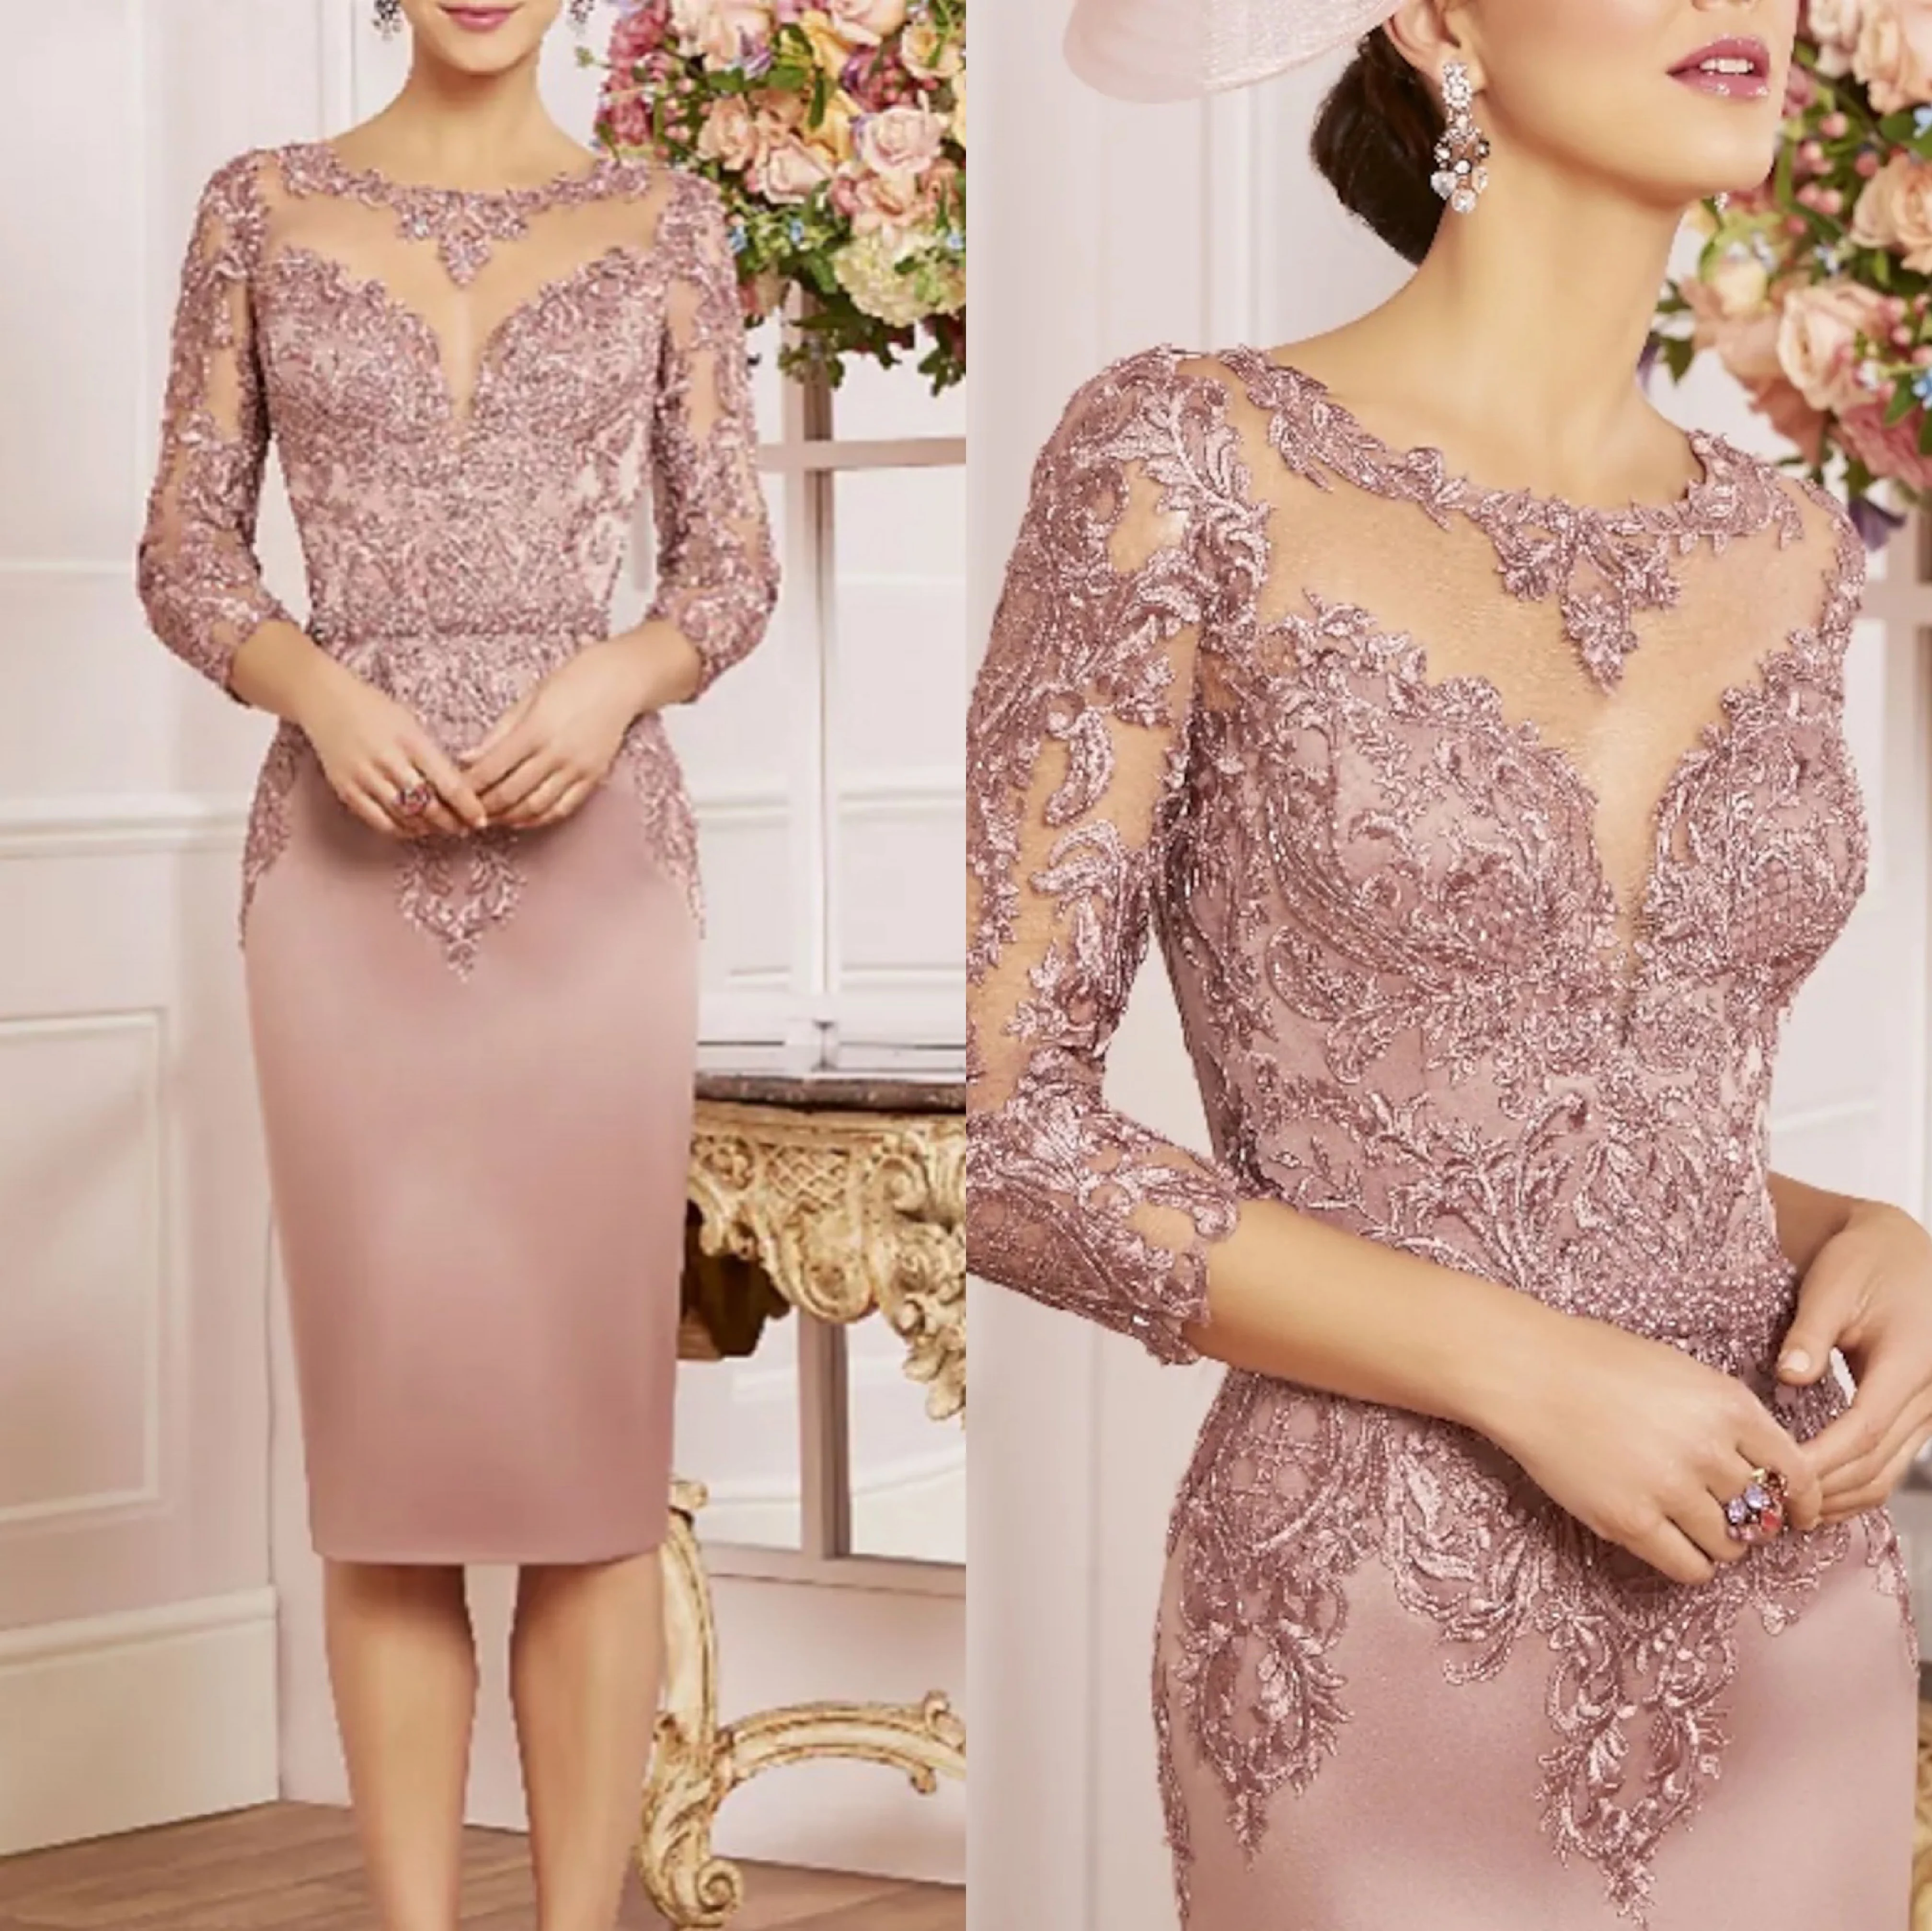 

Dusty Pink Mother Of The Bride Dresses 3/4 Sleeves Sheath Sheer Neck Appliqued Knee Lenght Groom Mother Evening Prom Dresses